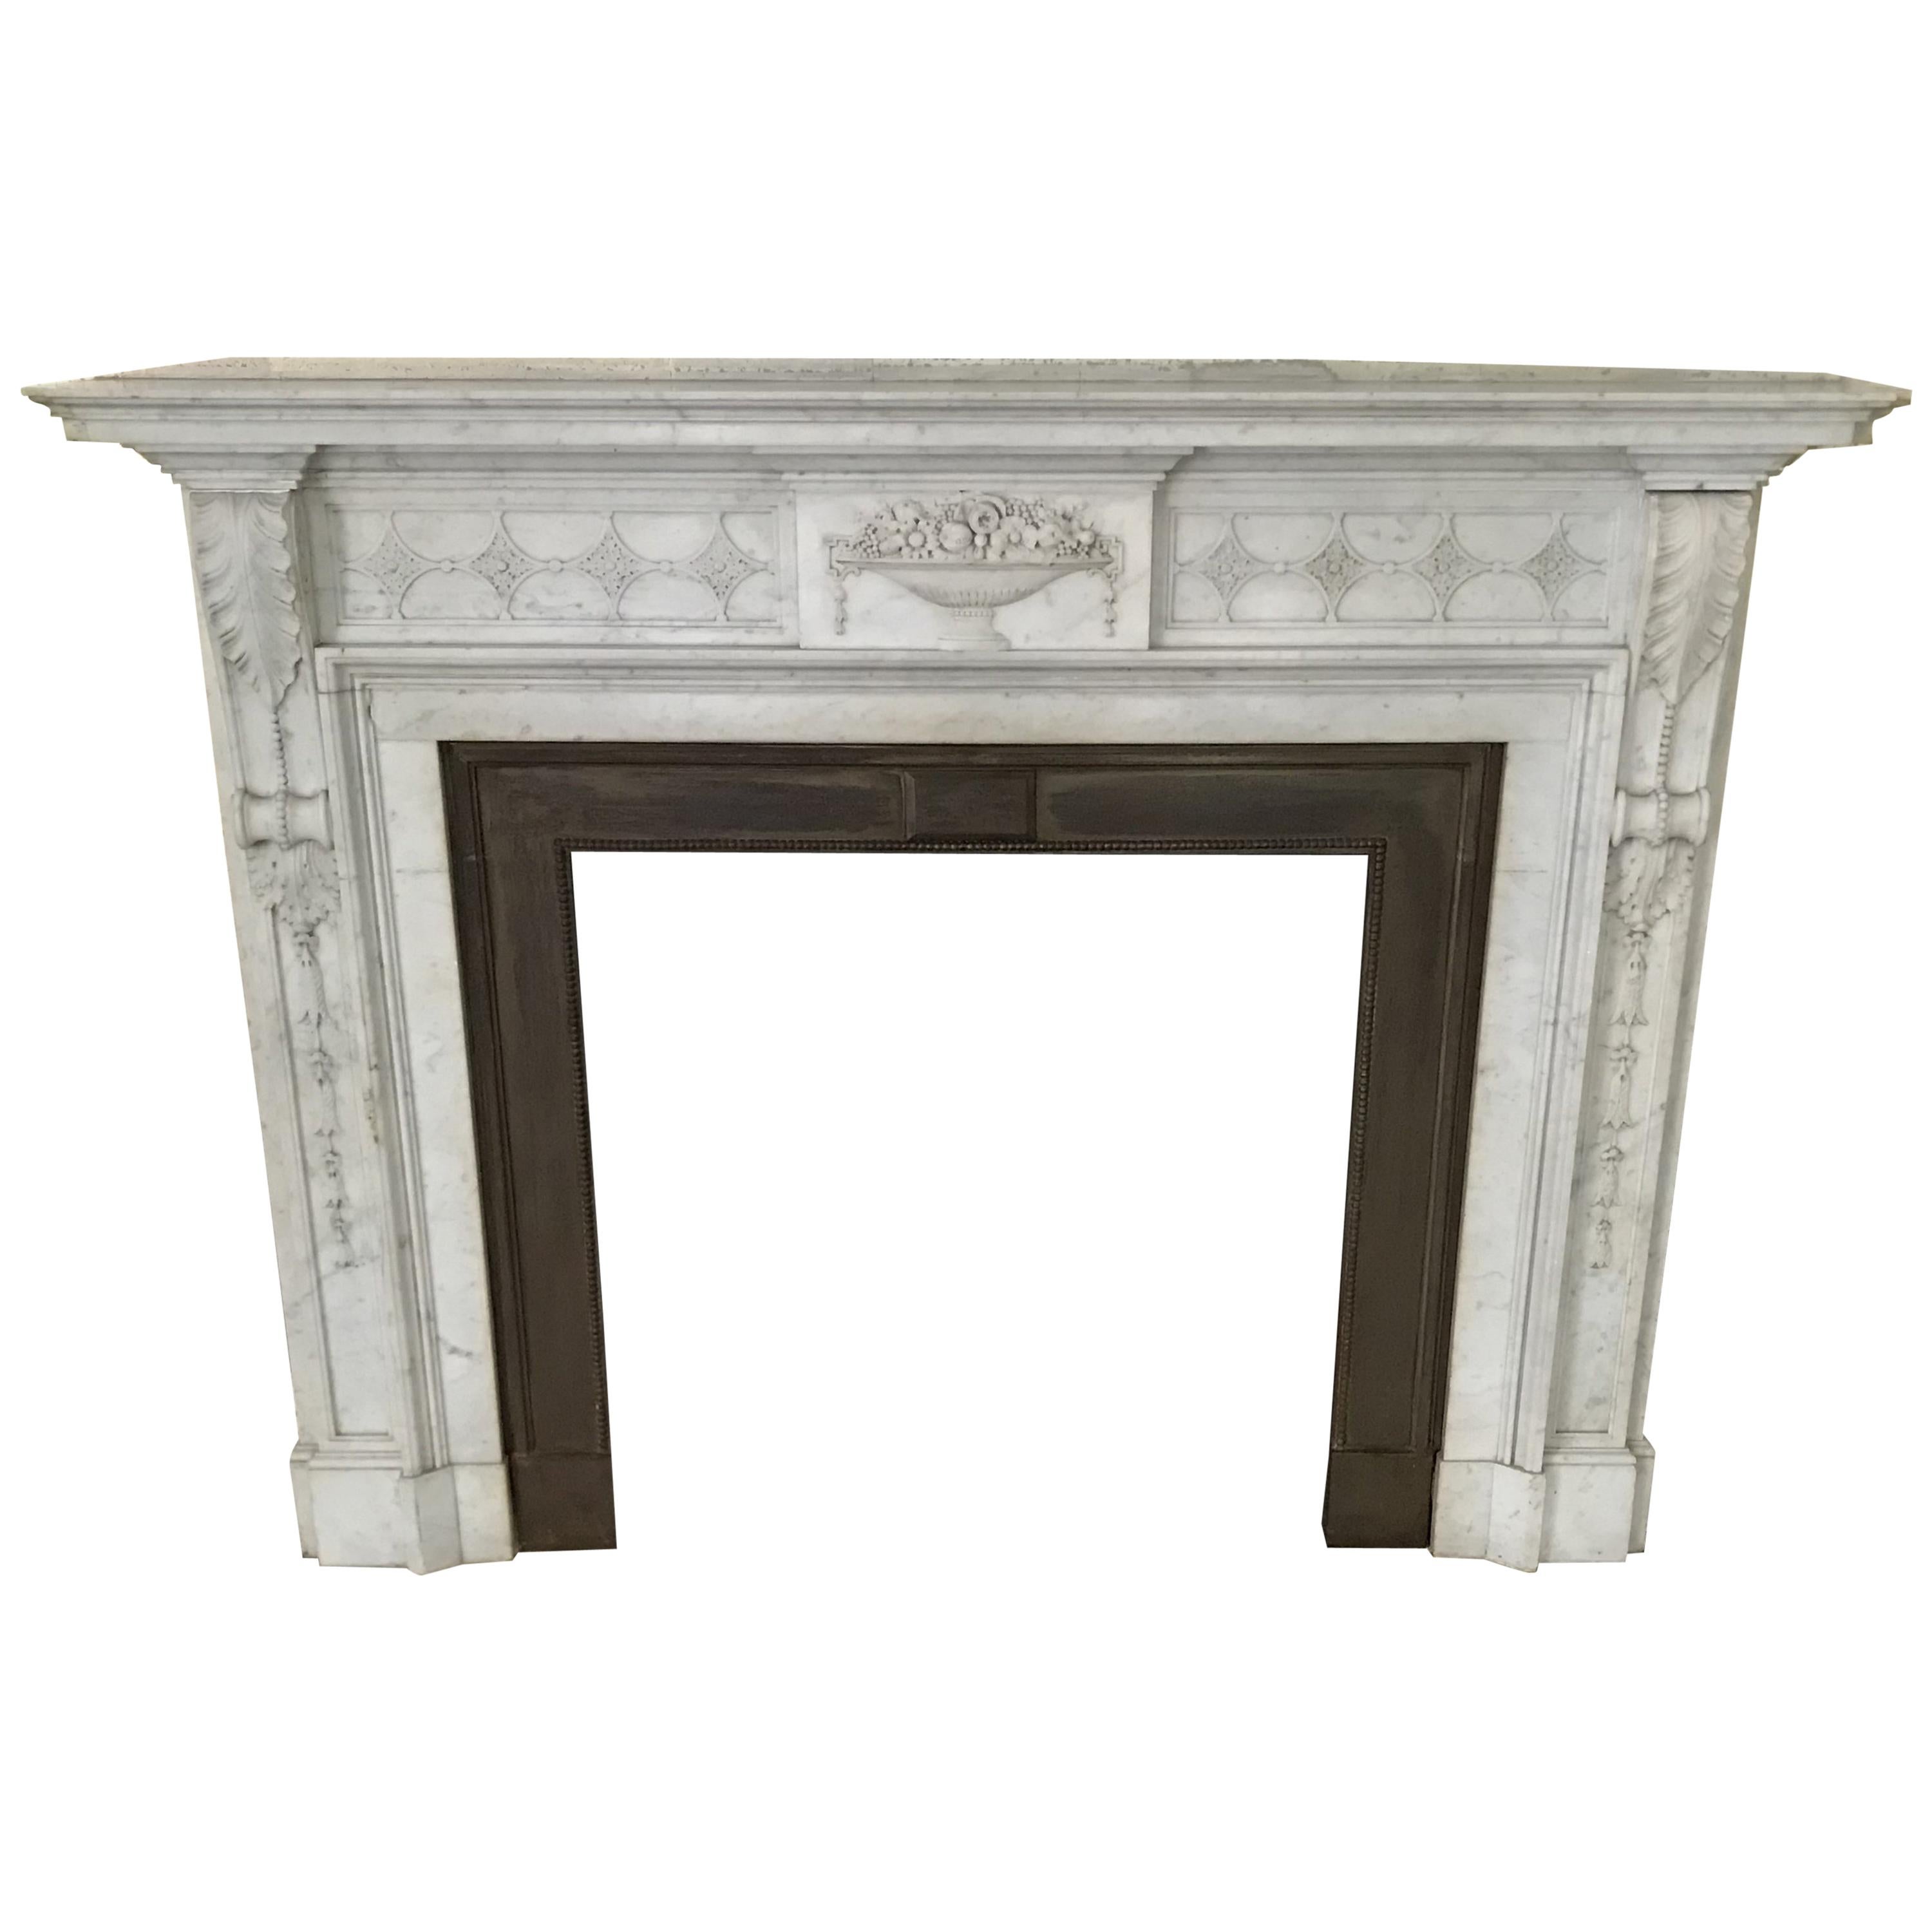 Antique French Louis XVI Carved Marble Fireplace Mantel Surround Bronze Insert